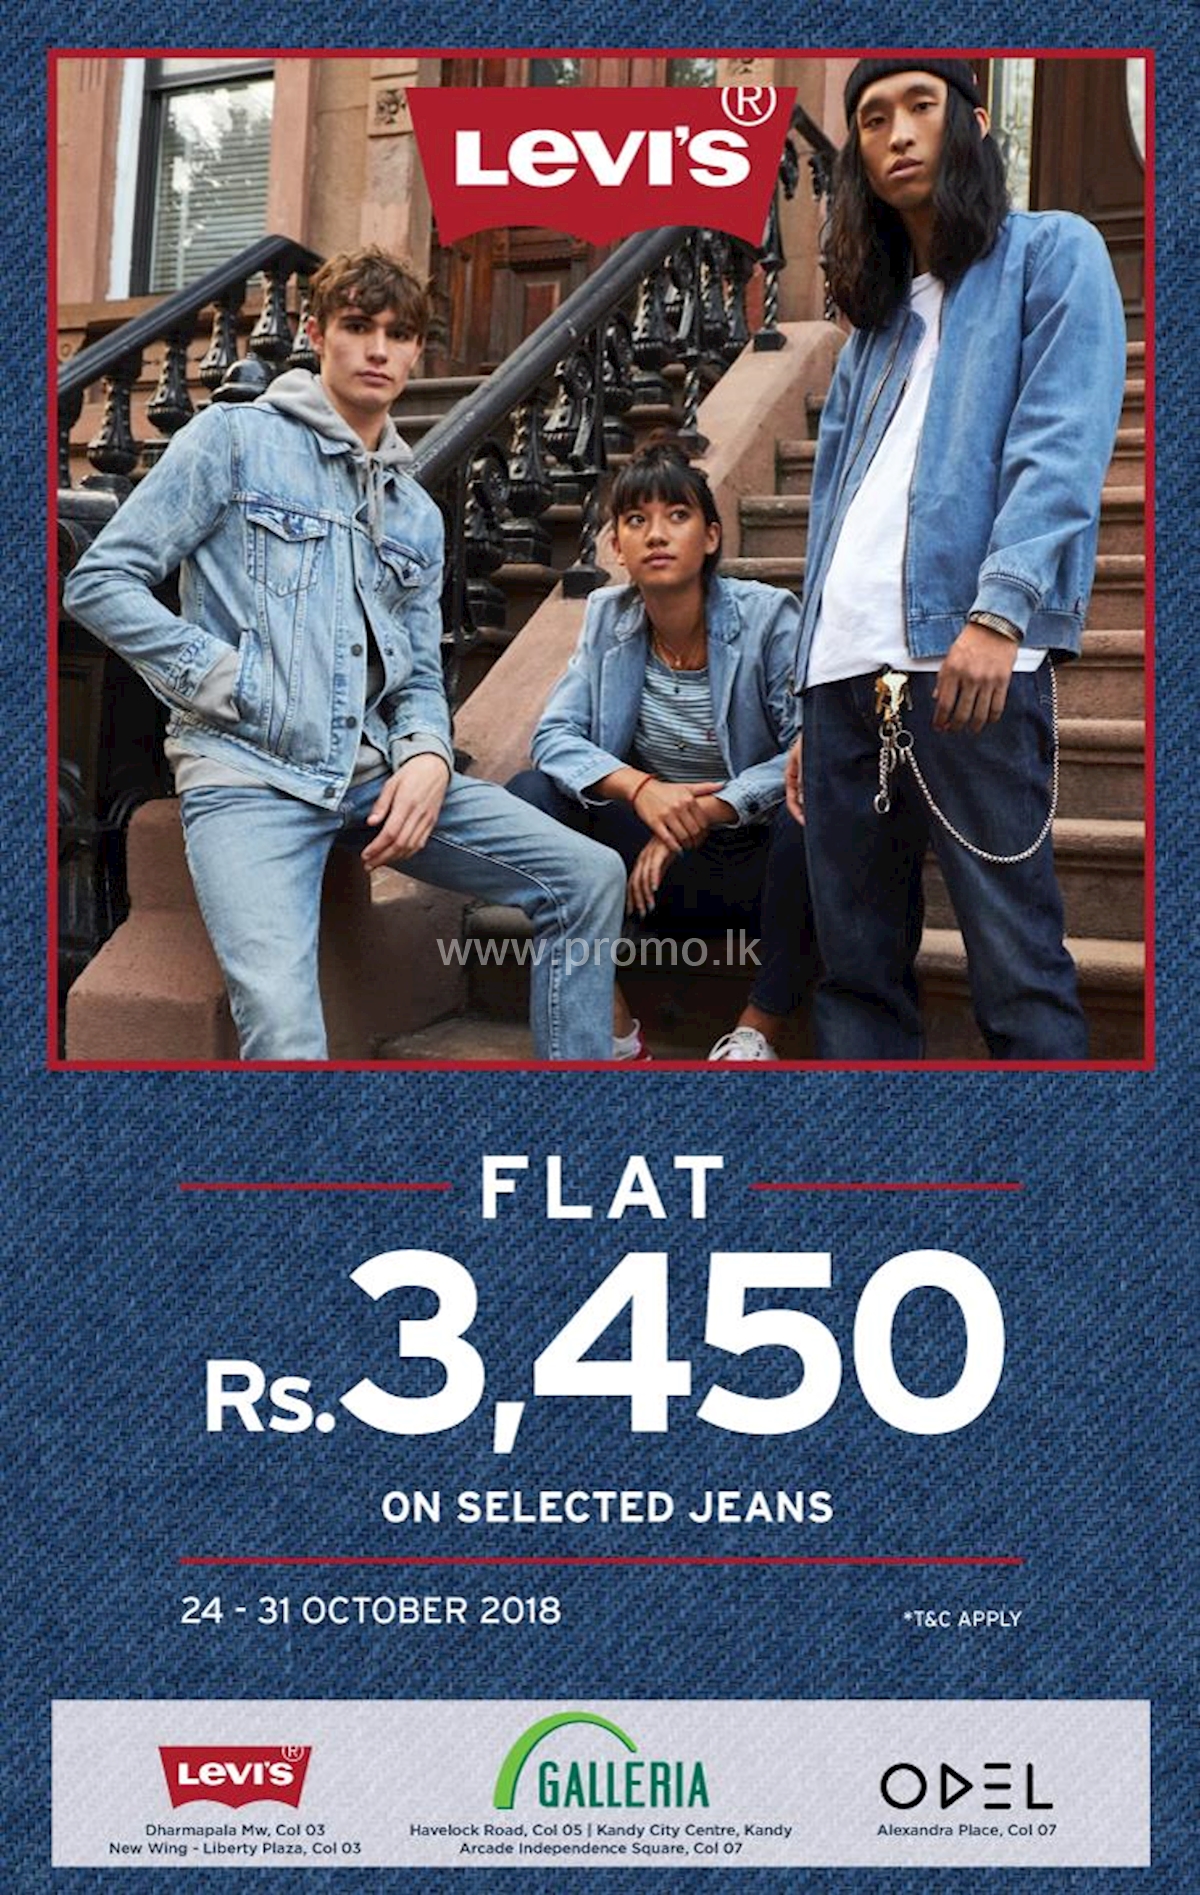 Get your Levis Jeans at a Flat rate of ,450/-